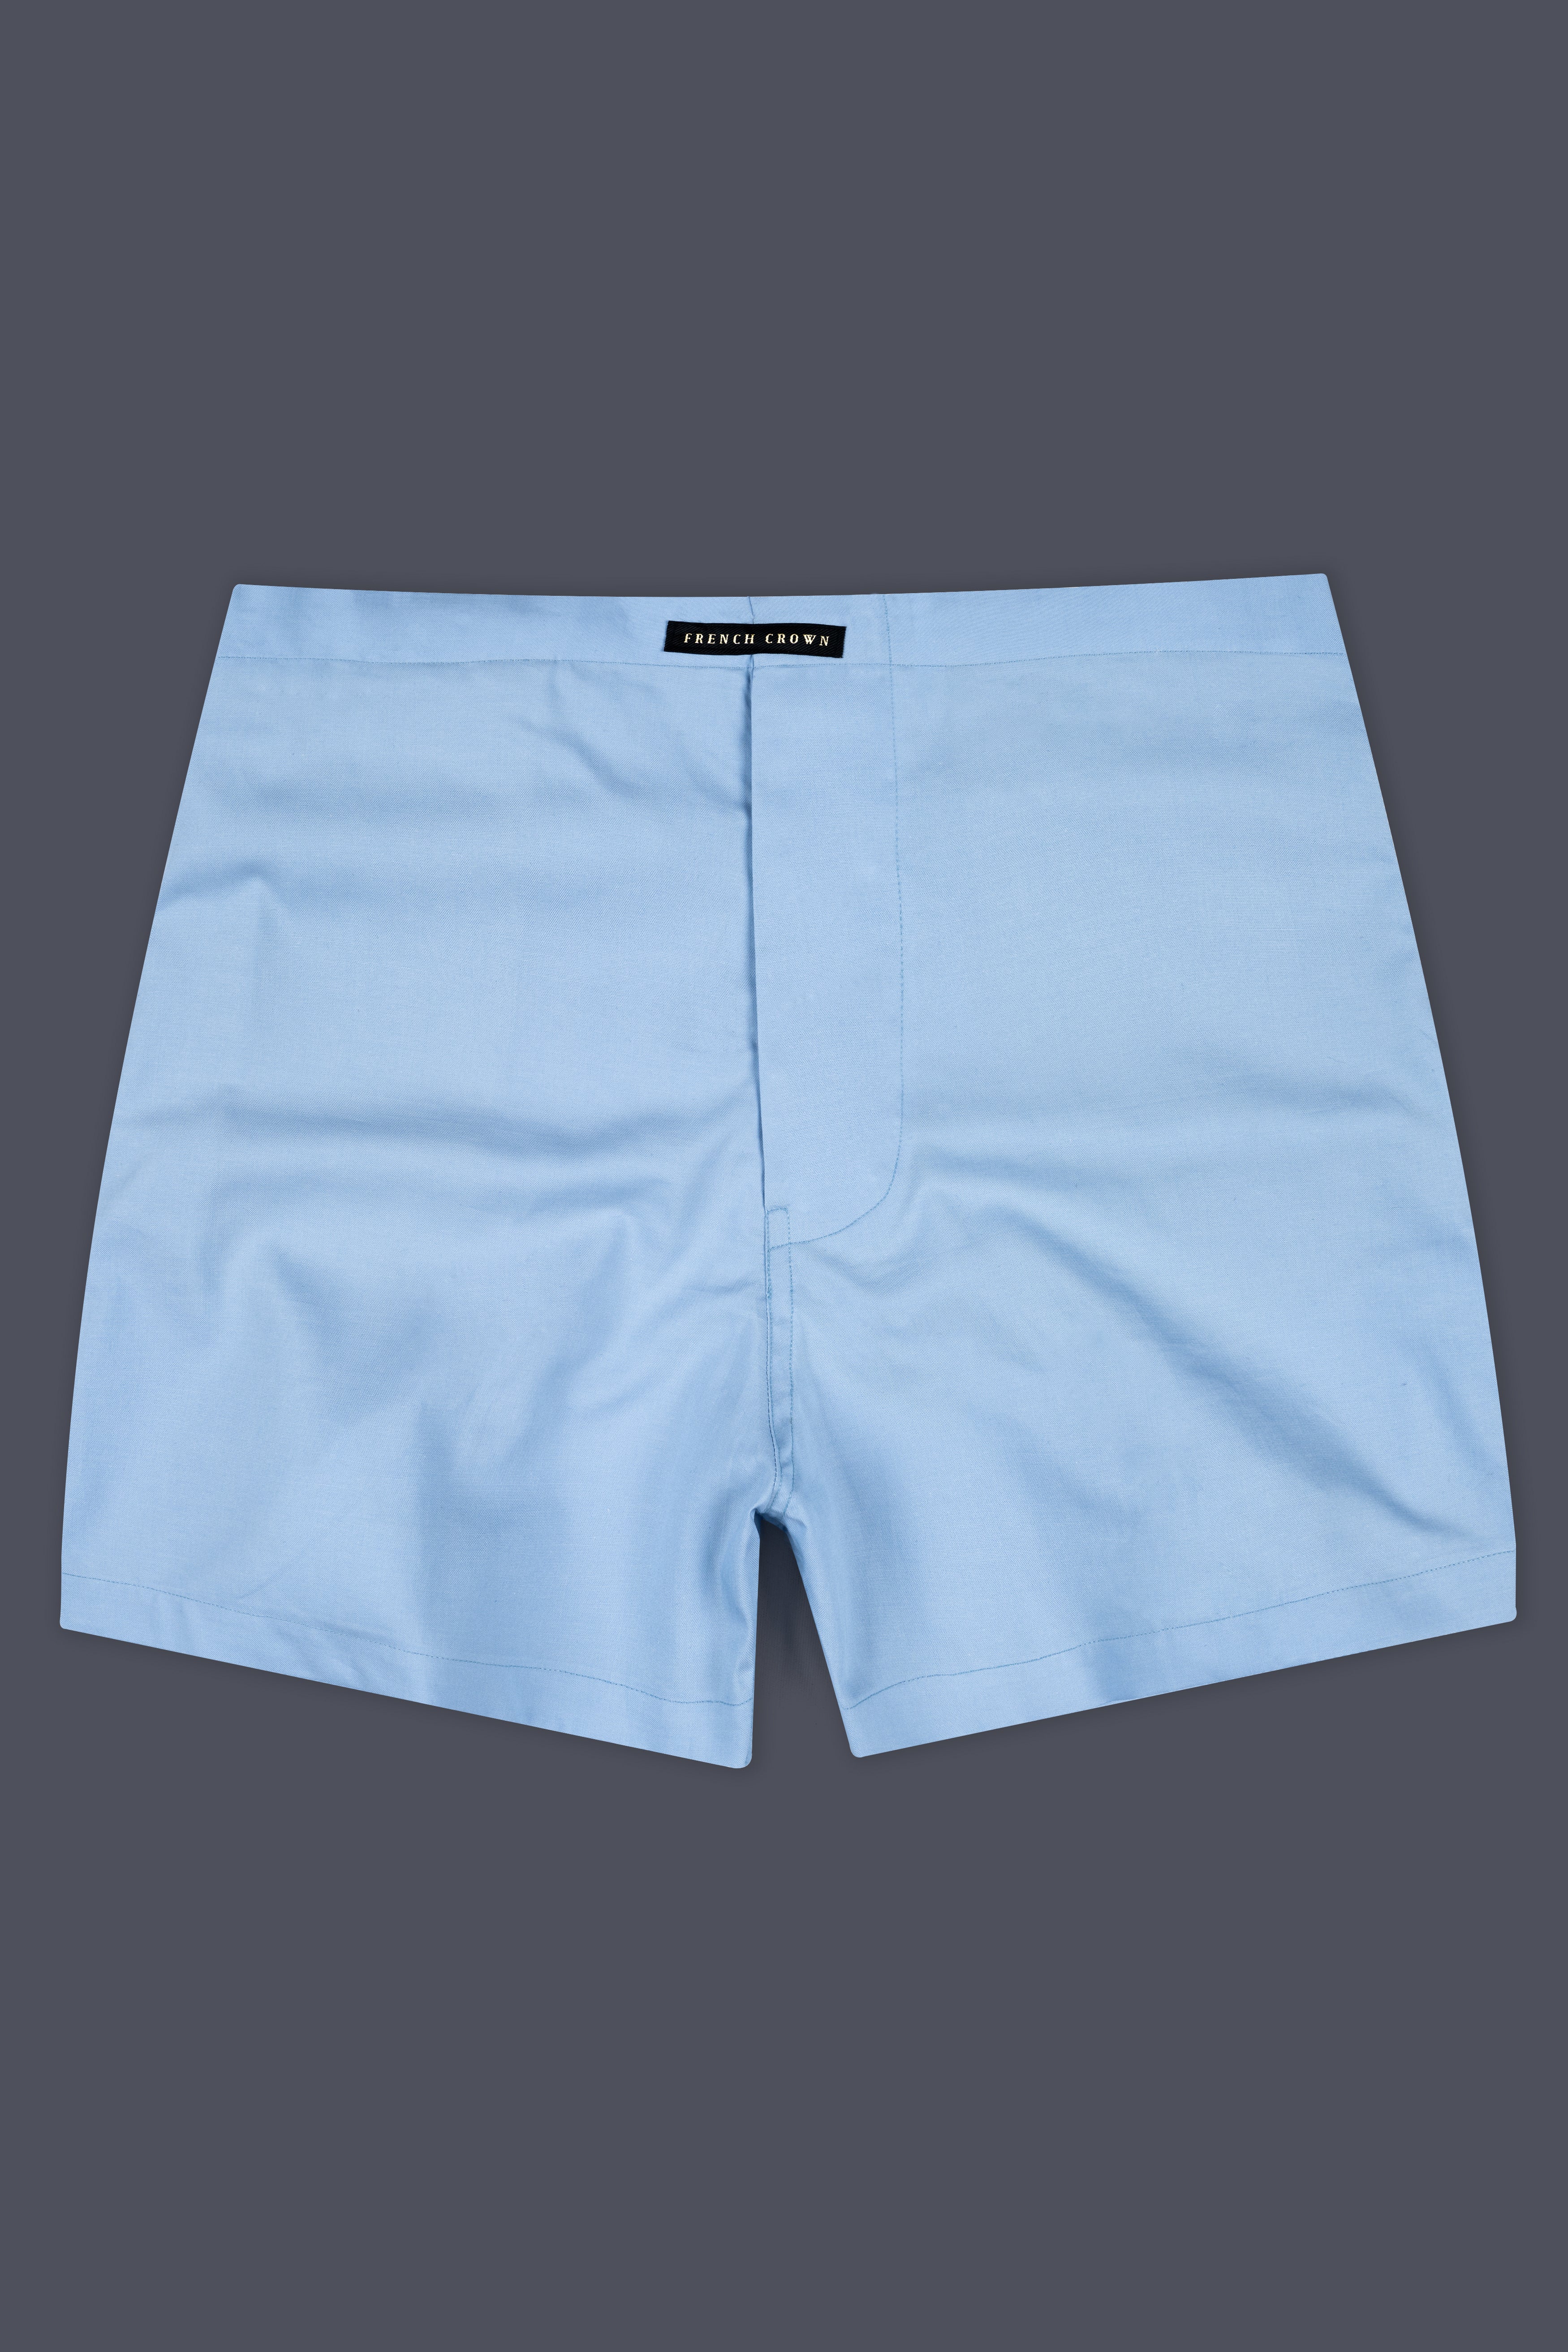 Spindle Blue Solid Royal Oxford Boxer